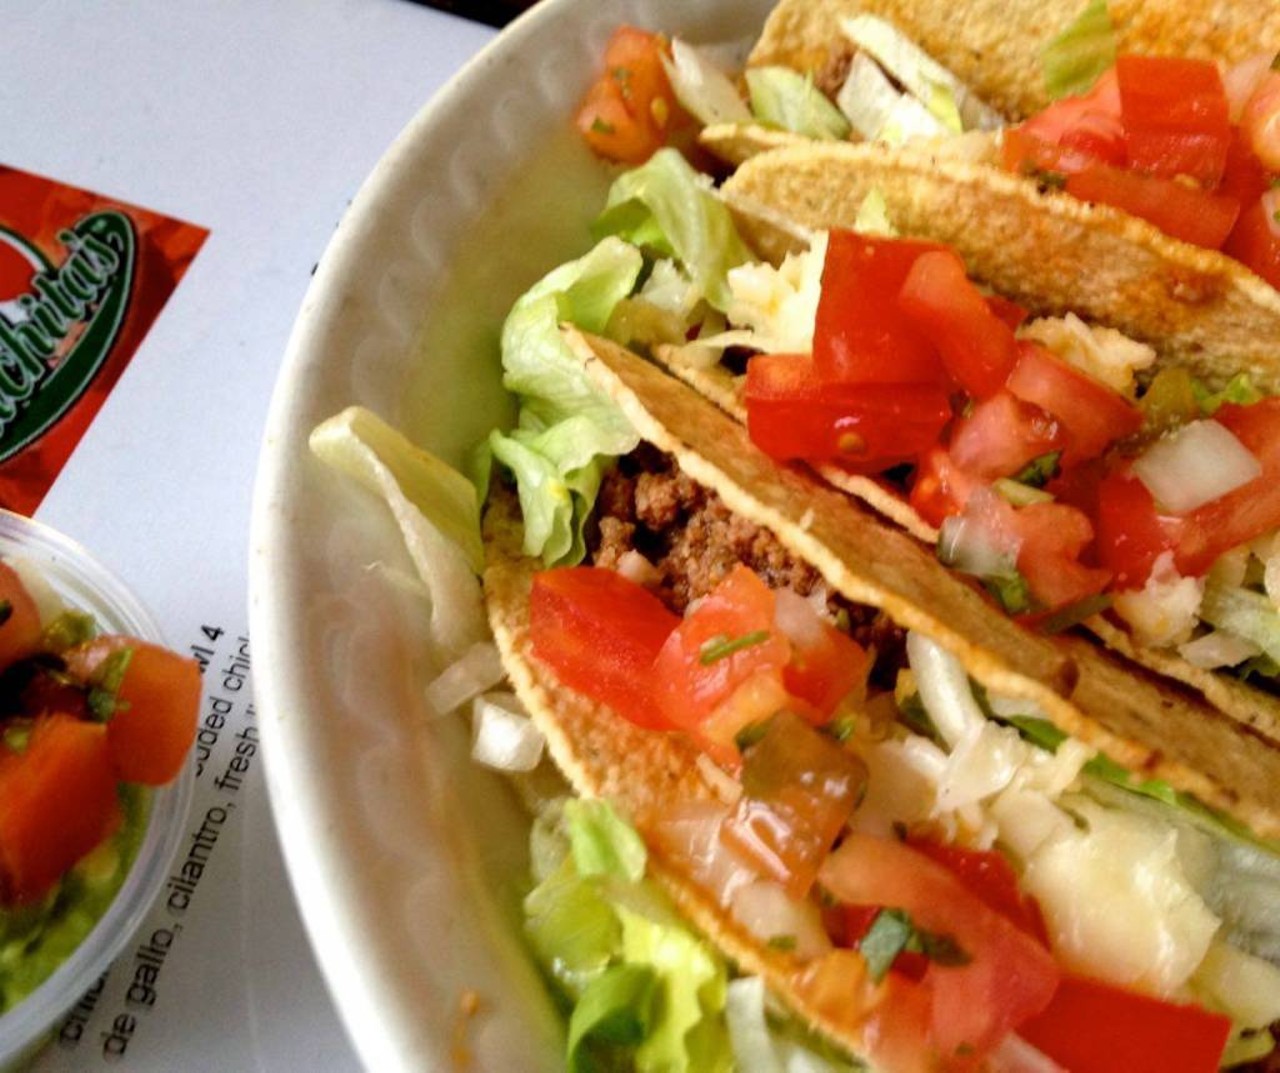 Luchita's 
Trying to fix your Mexican crave on a budget? Luchita's offers 99 cent beef, chicken and veggie tacos after 4 p.m. Plus, happy hour kicks off at 3 p.m. Hoorah! 3456 W 117th St, Cleveland, OH 44111. (Photo via Luchita&#146;s Mexican Restaurant, Facebook)